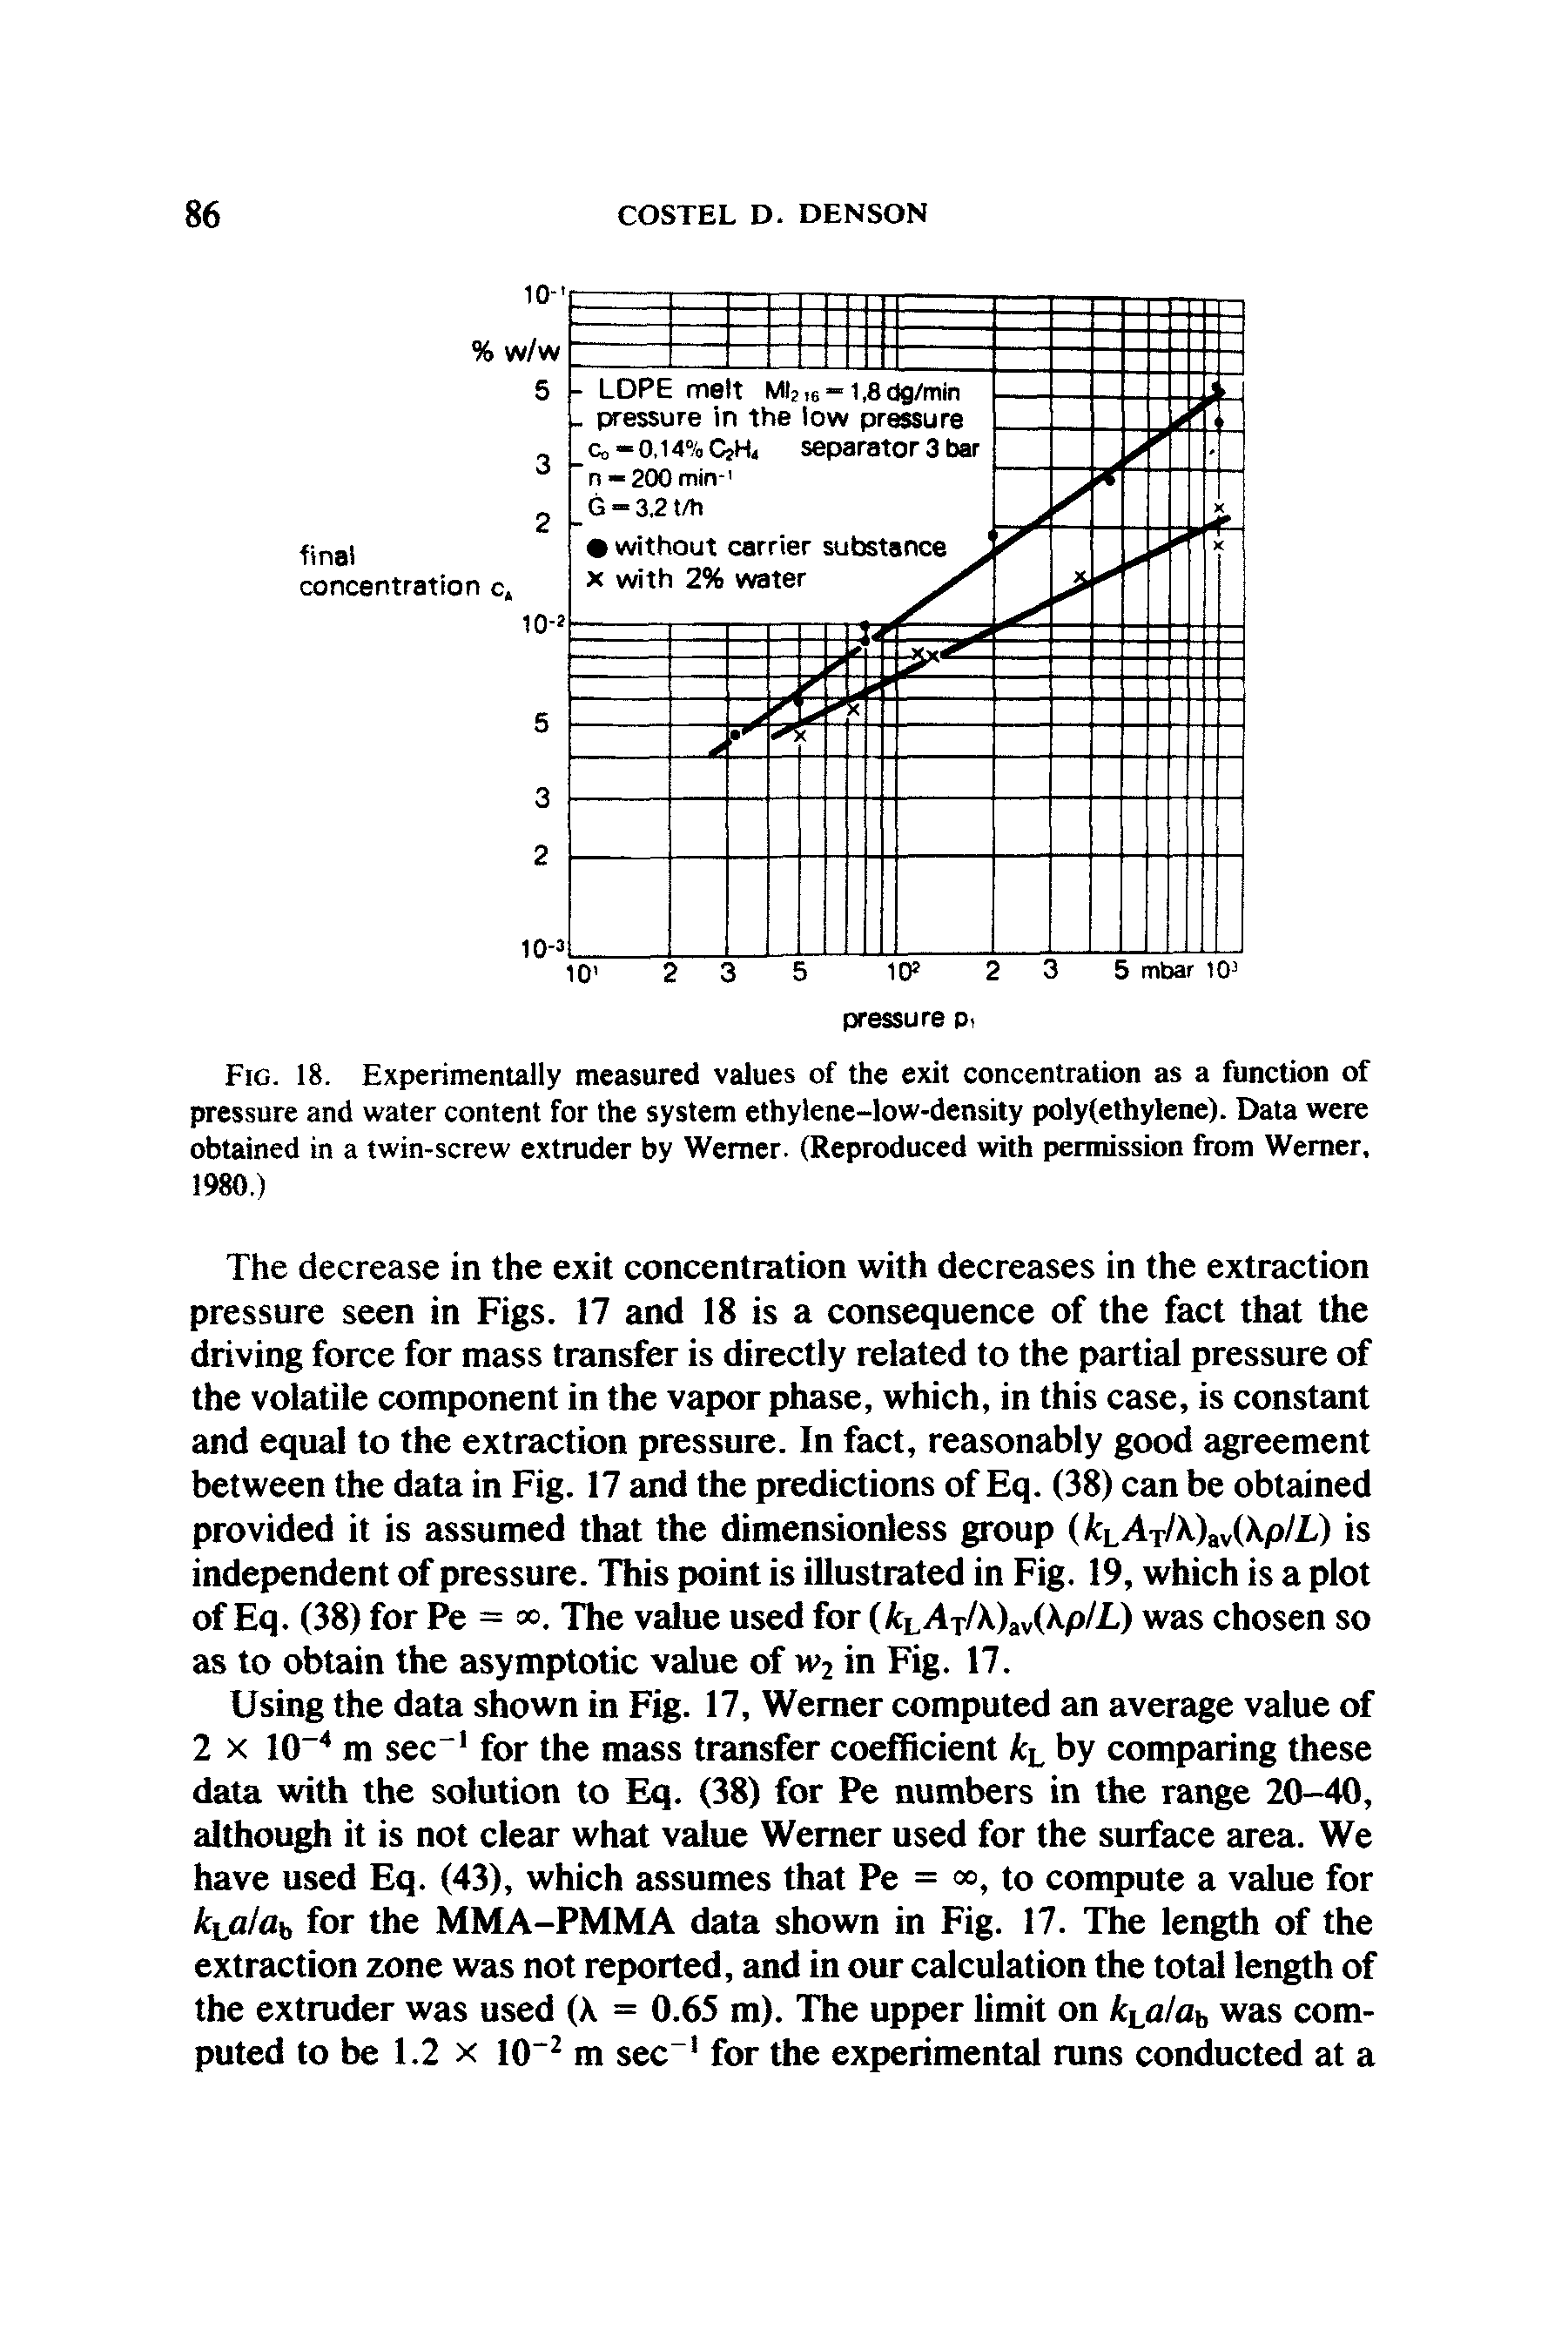 Fig. 18. Experimentally measured values of the exit concentration as a function of pressure and water content for the system ethylene-low-density polyfethylene). Data were obtained in a twin-screw extruder by Werner. (Reproduced with permission from Werner, 1980.)...